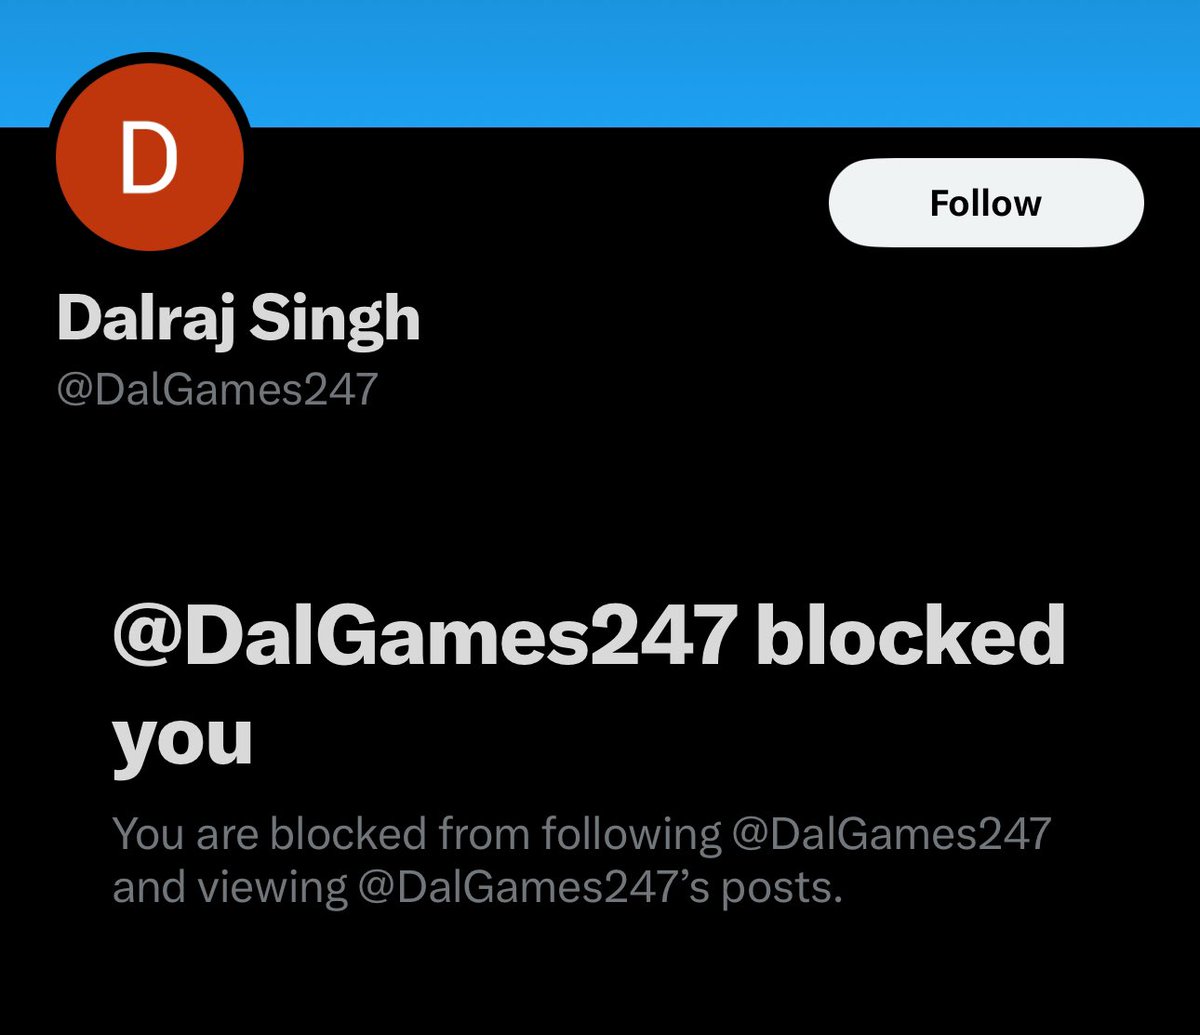 As if blocking me is going to do anything Dalraj 😂👏 The word is out now. The videos and the texts. You’re a racist. The people of Bedworth and beyond know you’re scum. You can hide behind your pissstained bedroom curtains, absolute lettuce. Racist scumbag.